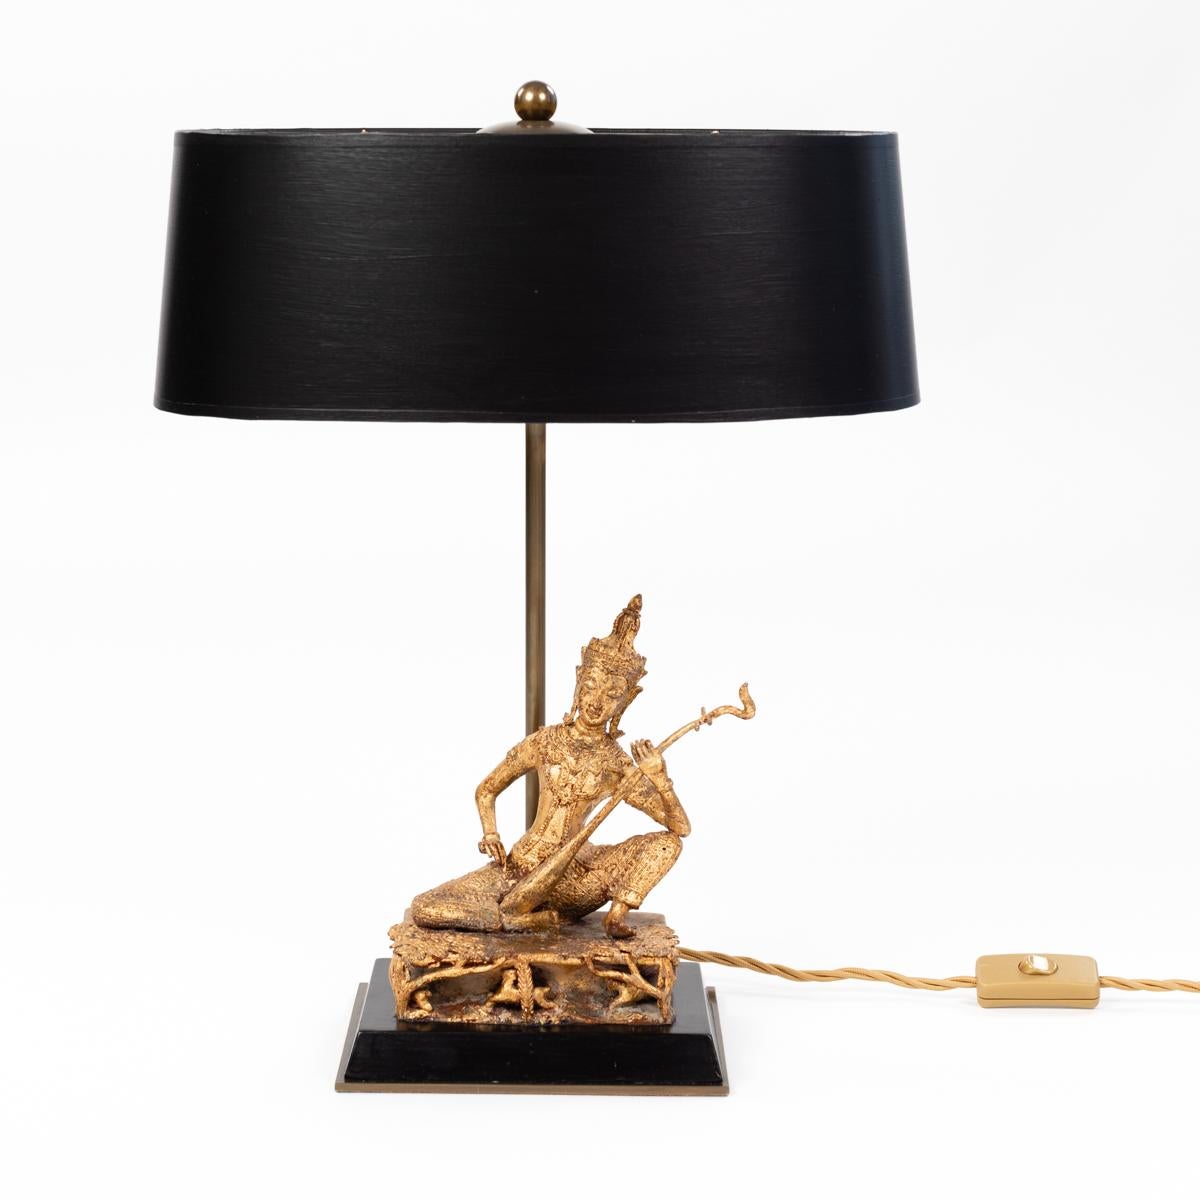 
Small figural table lamp of a seated temple musician in gilt bronze on a black wooden base. 
The noble object dates from the beginning of the 20th century.
Thai temple guardian sits on an ornate pedestal and plays a side instrument.
The figure is